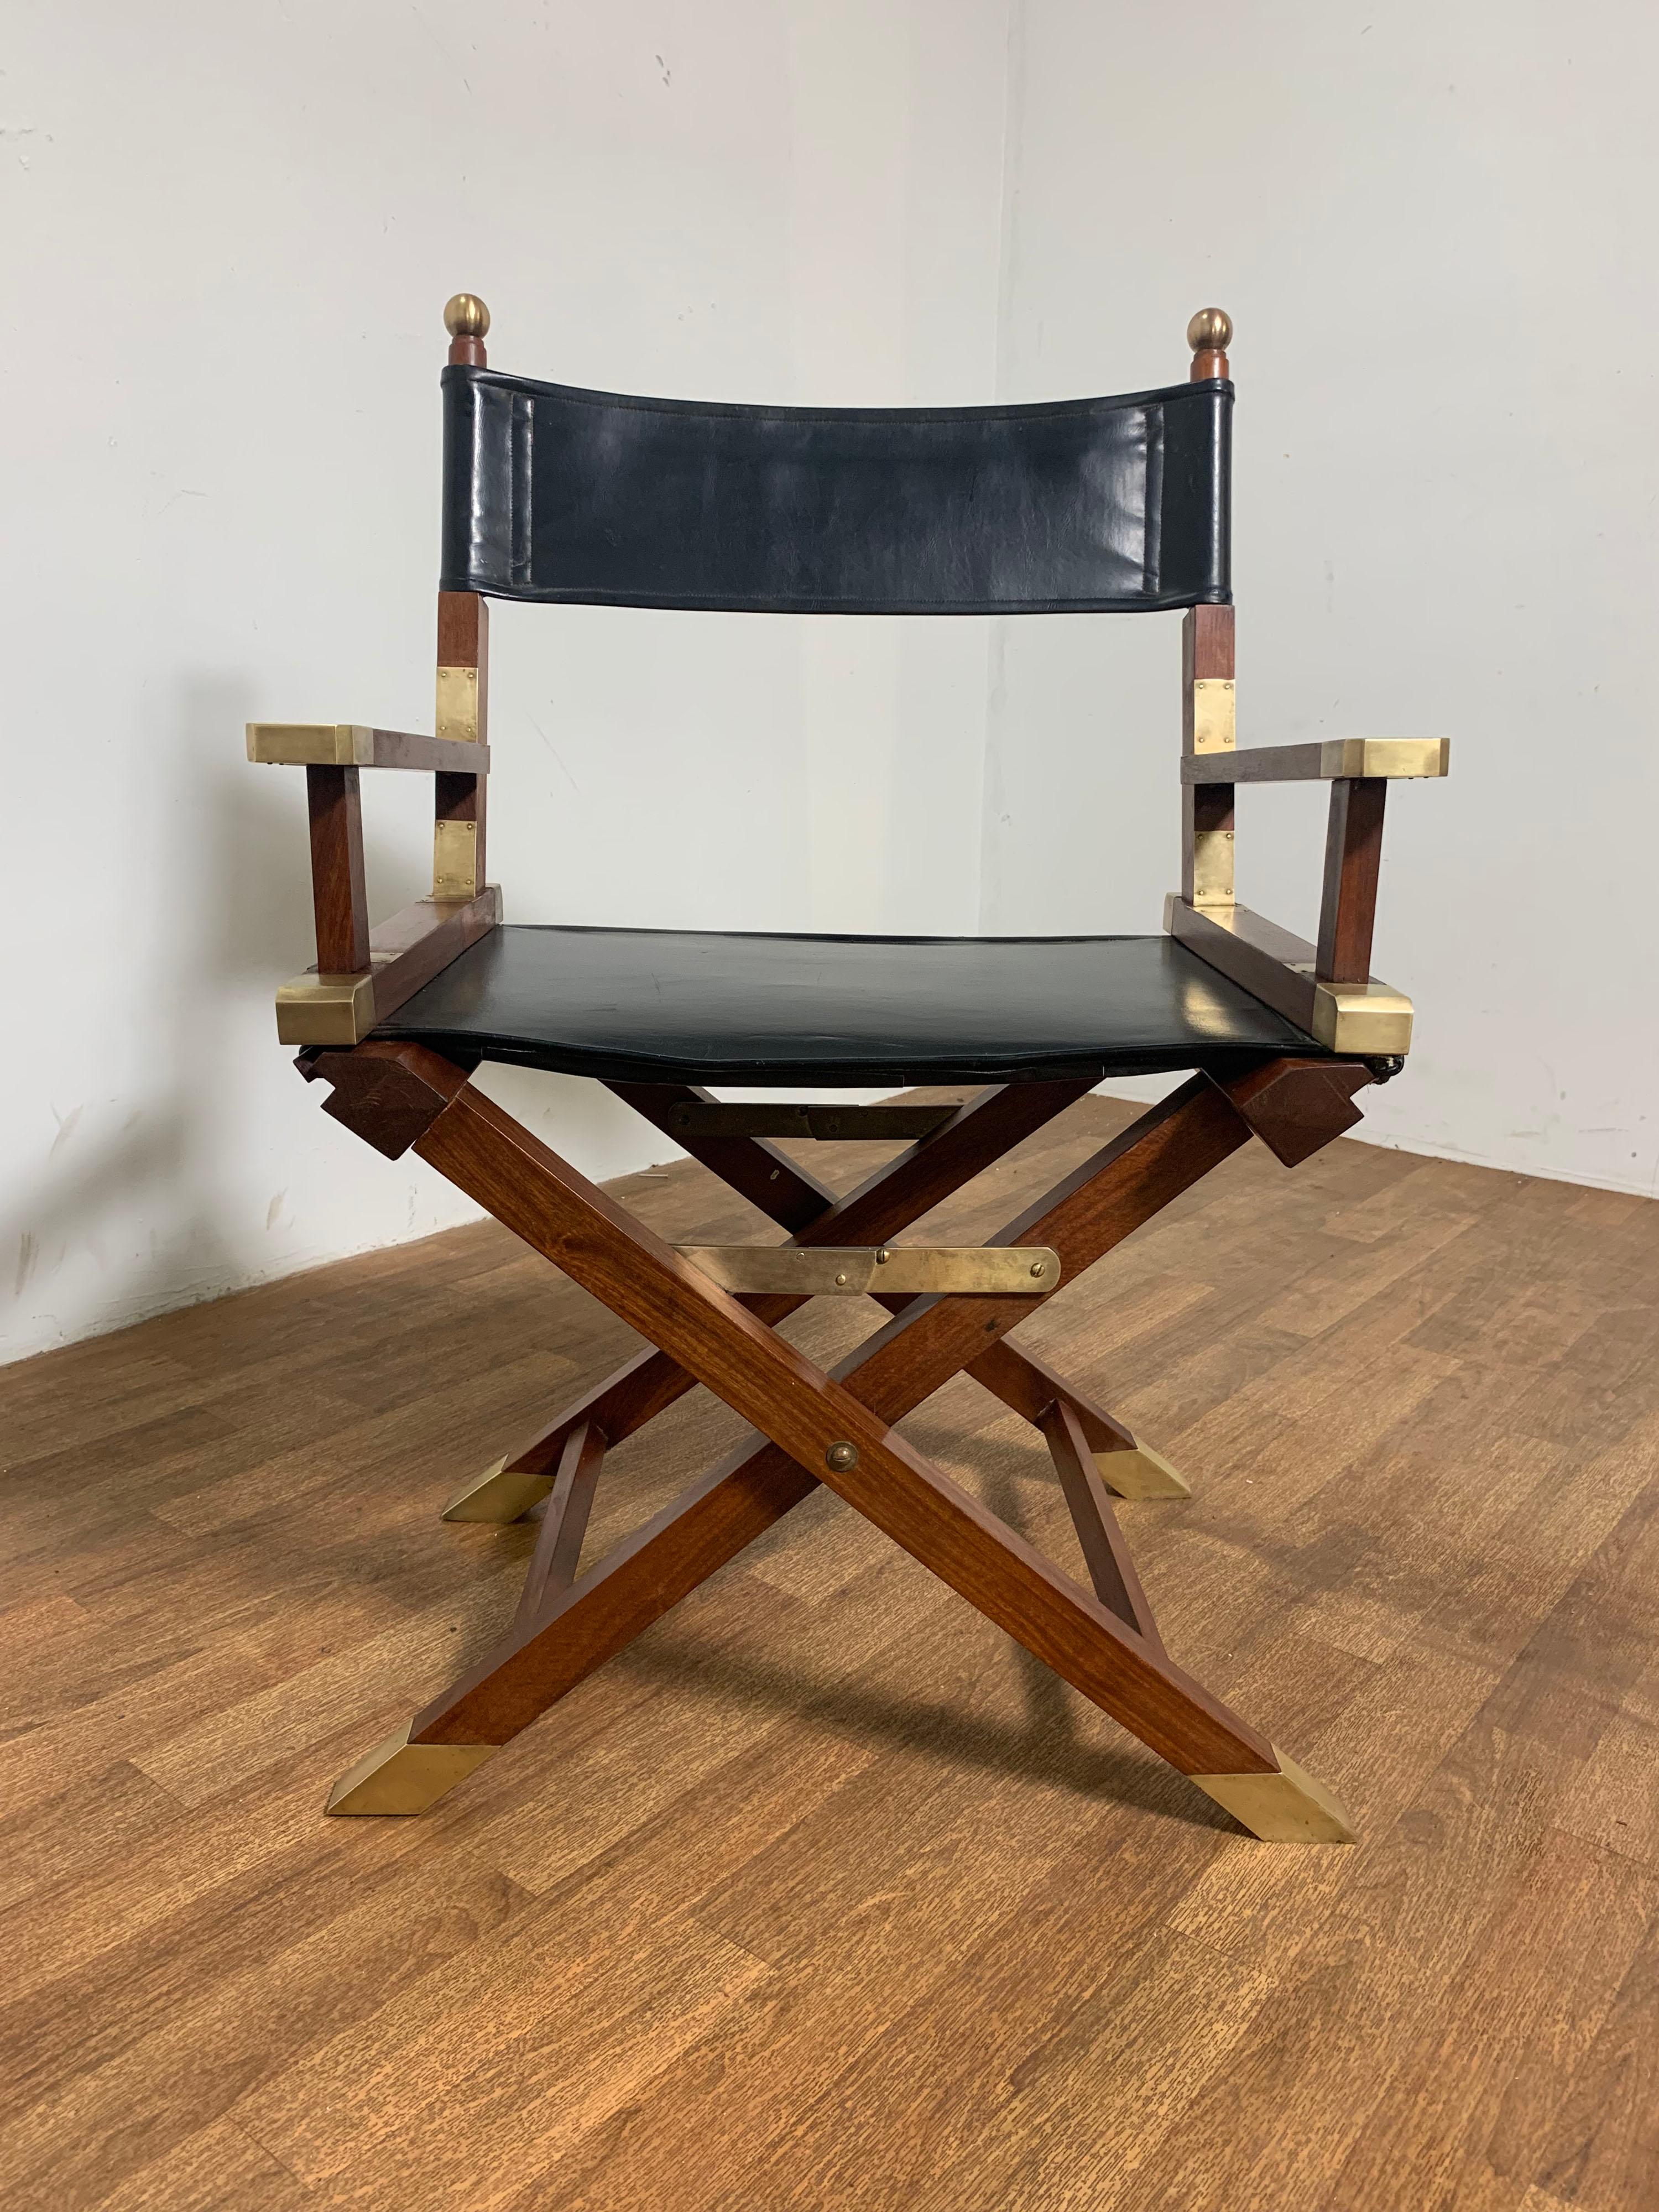 Pair of Bespoke Charlotte Horstmann Rosewood and Brass Campaign Chairs, C. 1950s In Good Condition For Sale In Peabody, MA